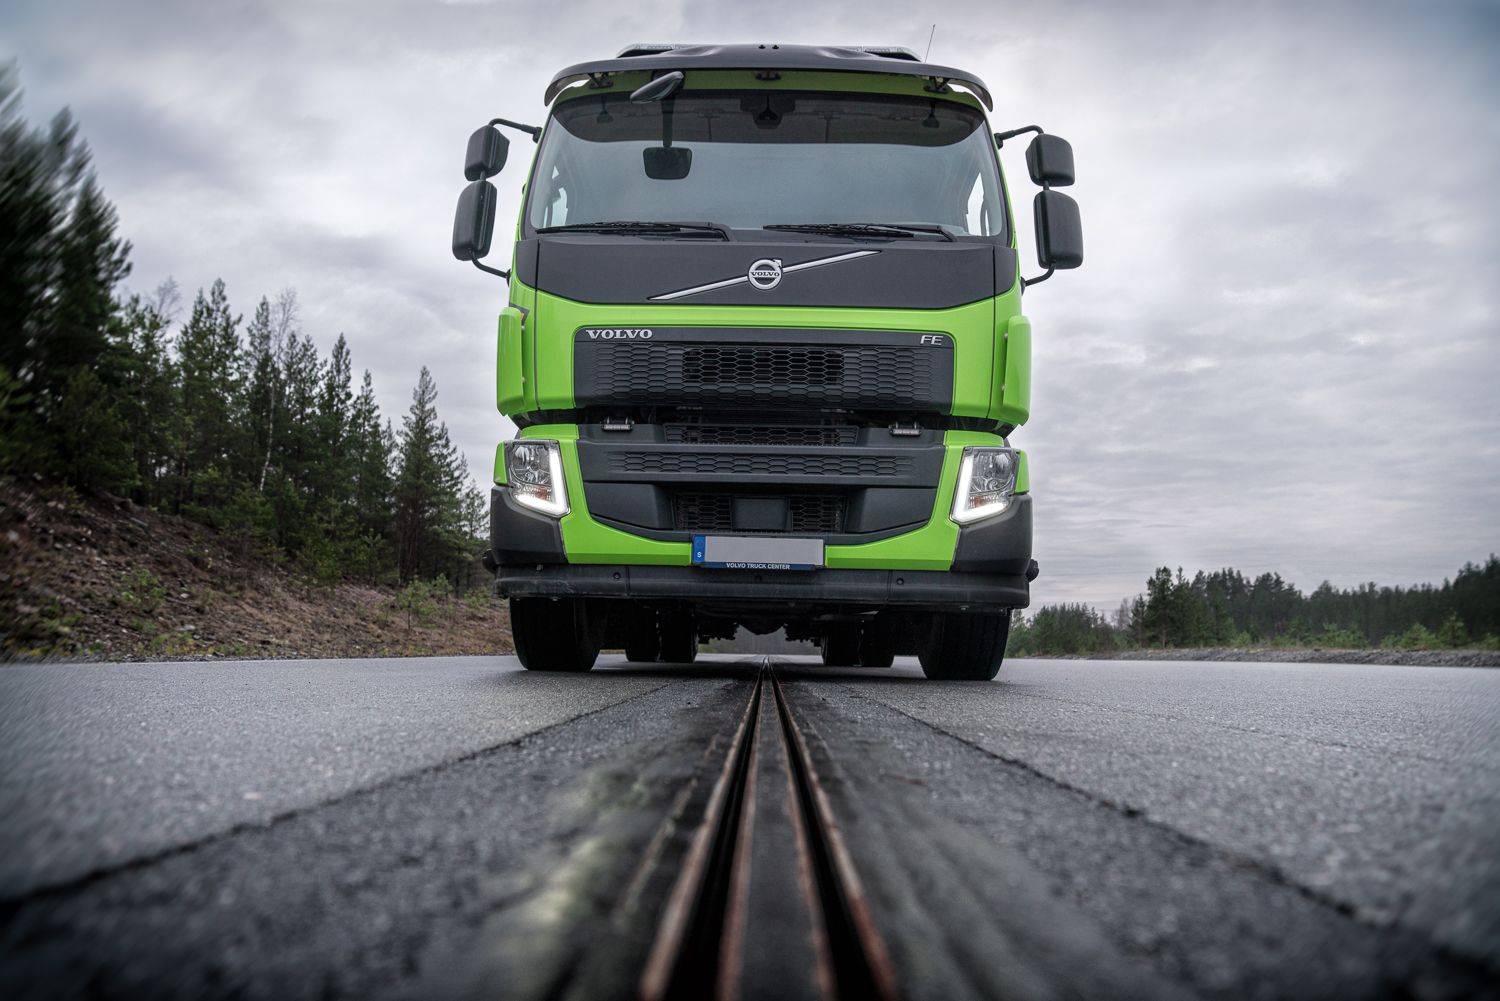 Swedish Evias will electrify the roads of the world